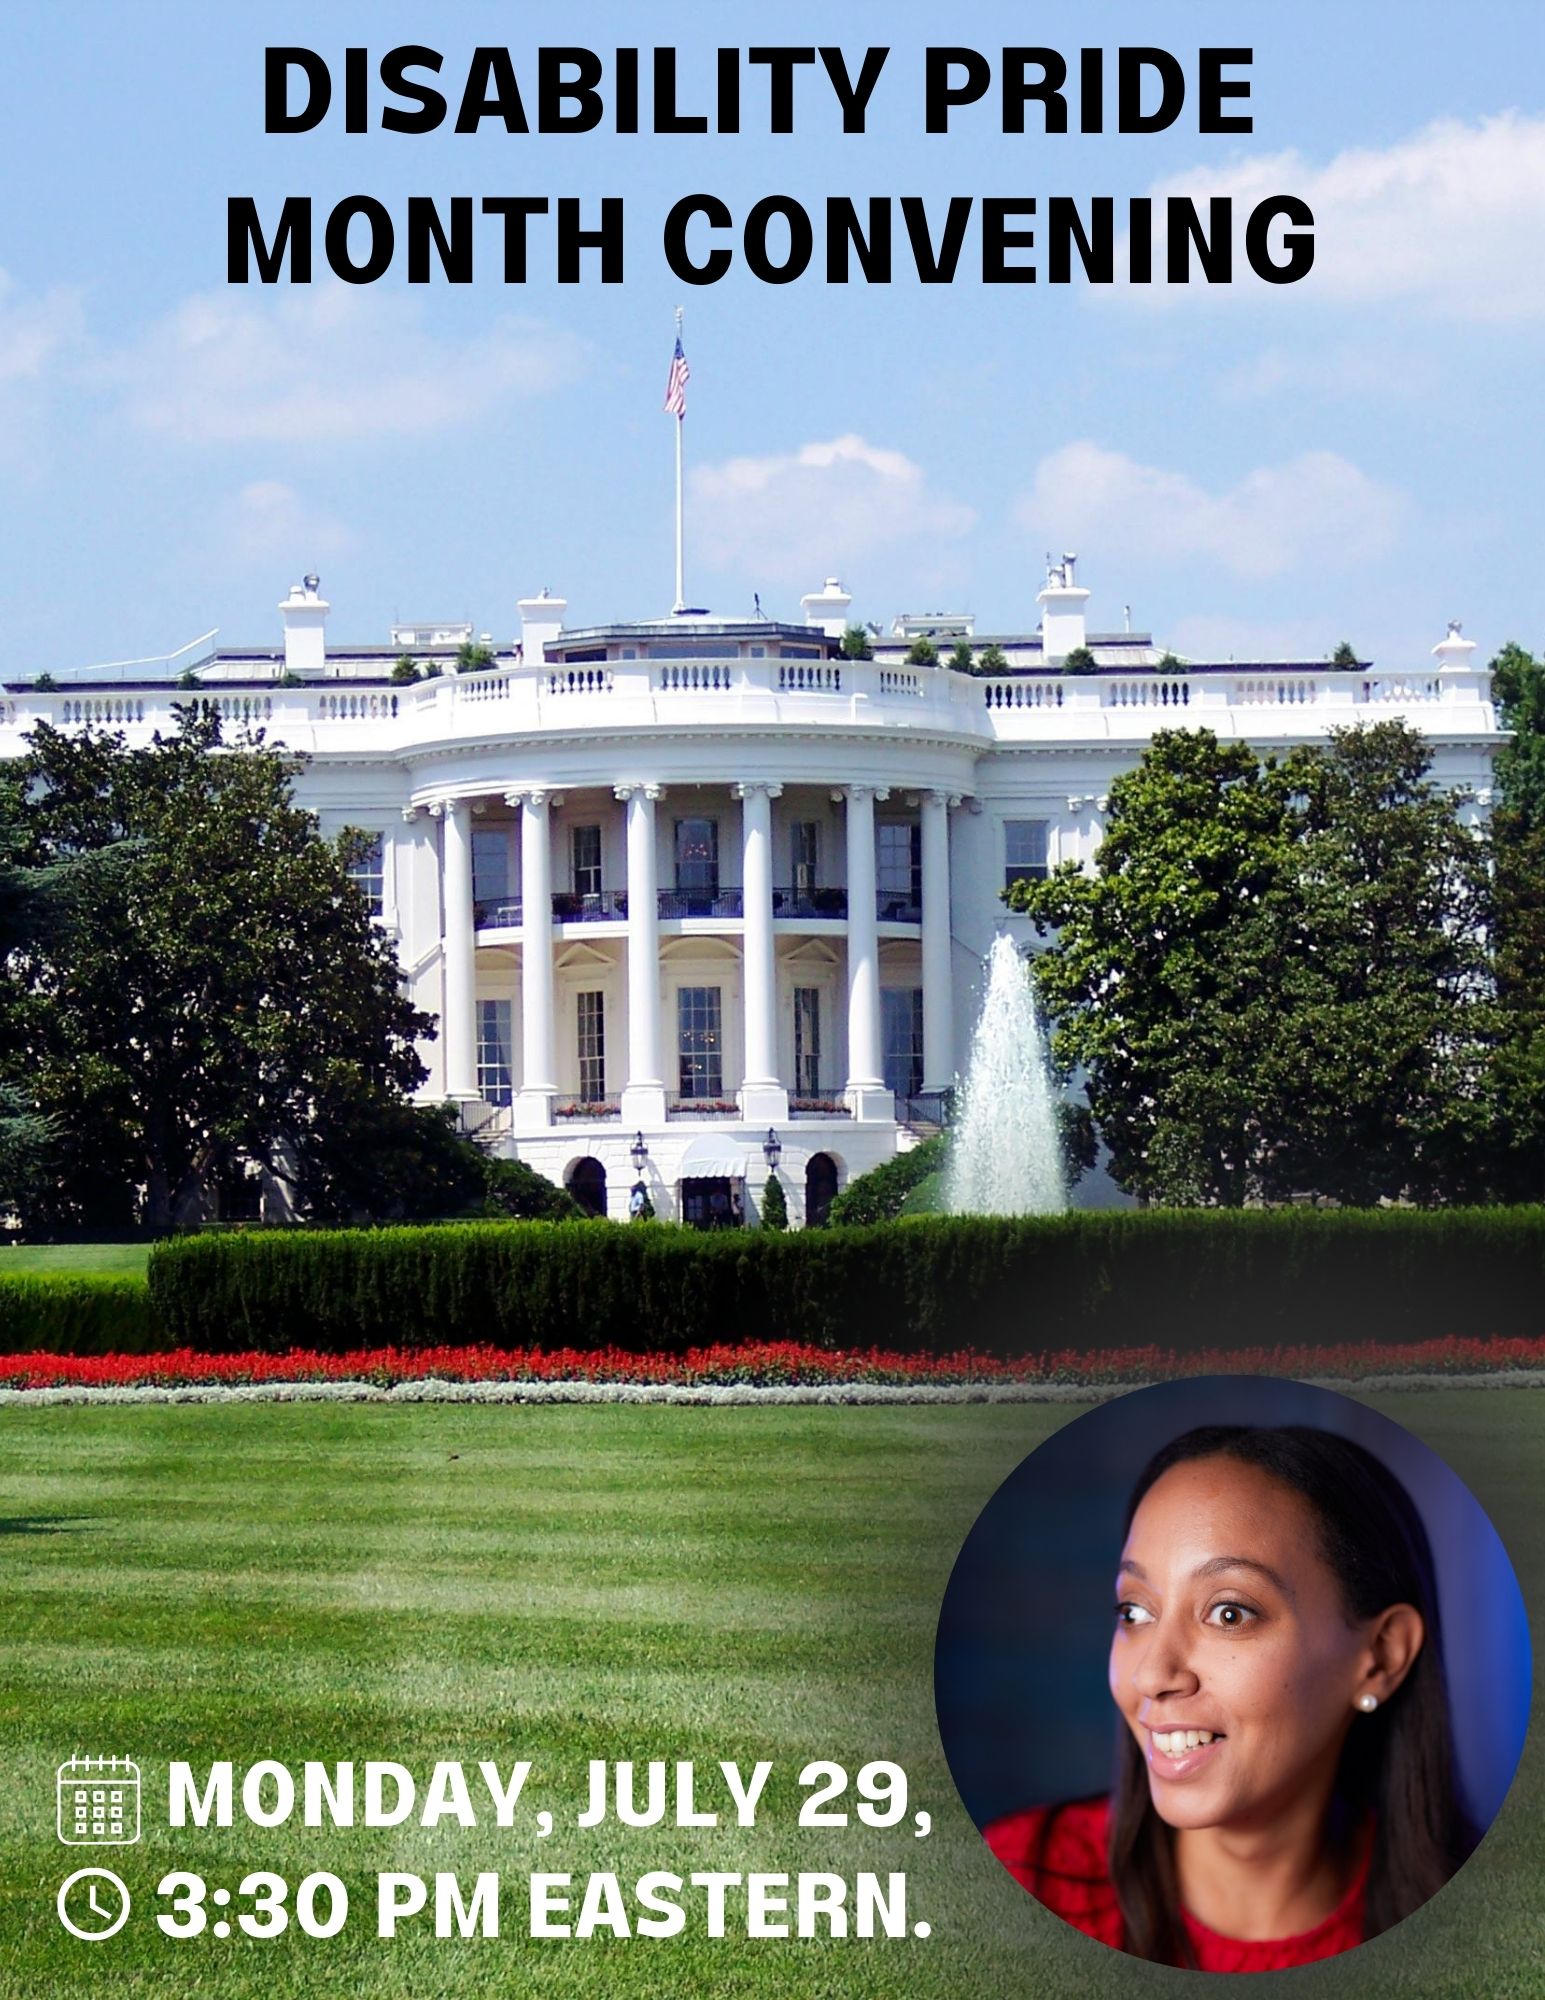 The White House on a sunny day. Text over the image reads "Disability Pride Month Convening, Monday, July 29, 3:30 PM Eastern." On the bottom right of the image is a smiling portrait of Haben Girma.